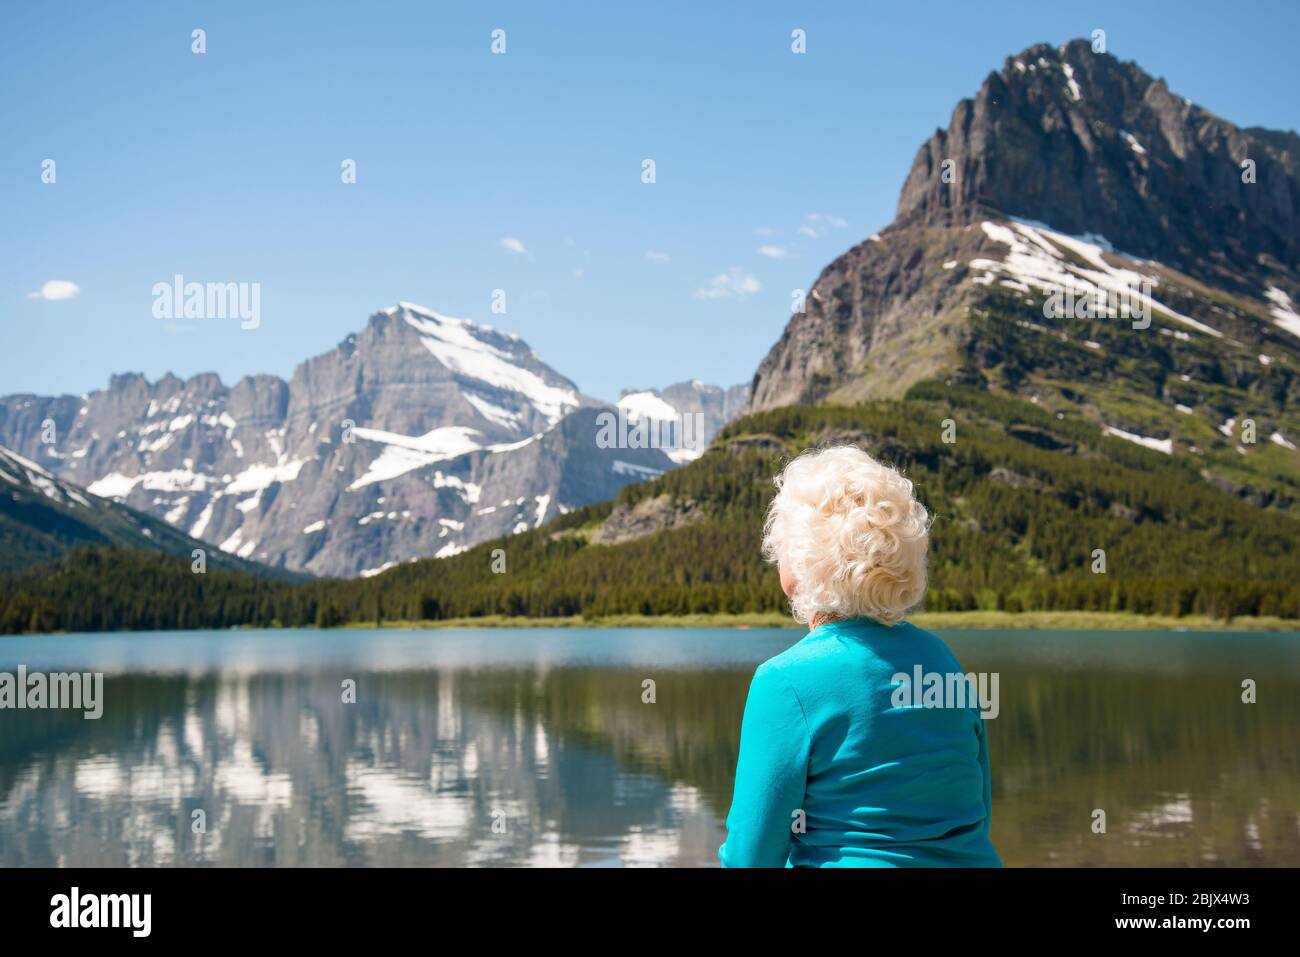 Elderly woman looking away from camera at mountain landscape Montana. 70 year old Blonde hair Glacier National Park copy space scenic destination. Stock Photo